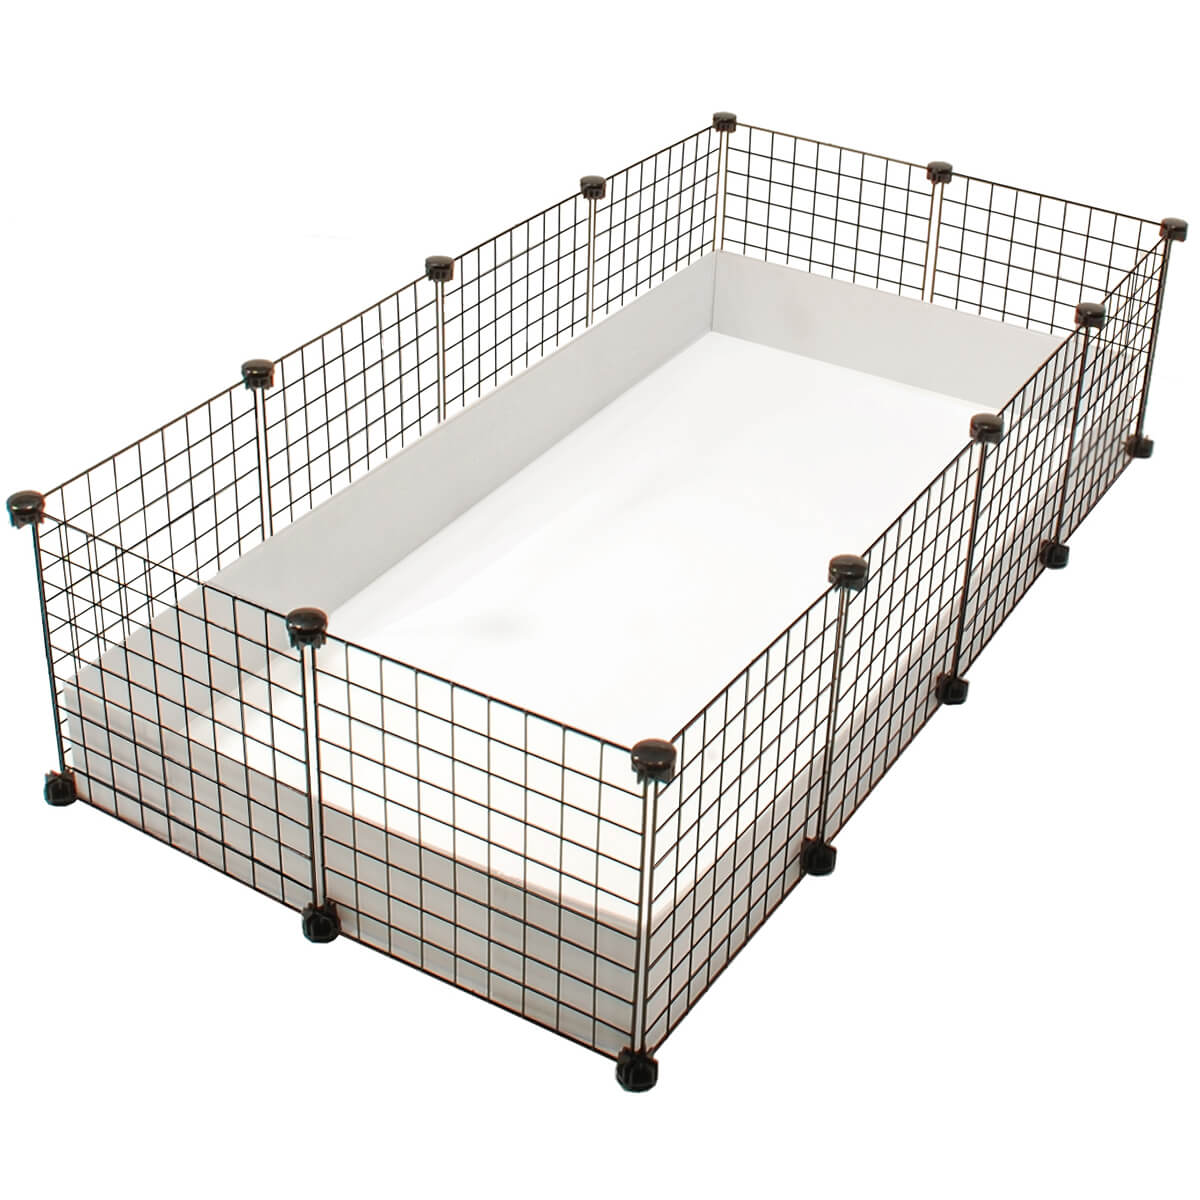 Large 2x4 Grids Cage Standard Cages Cagetopia